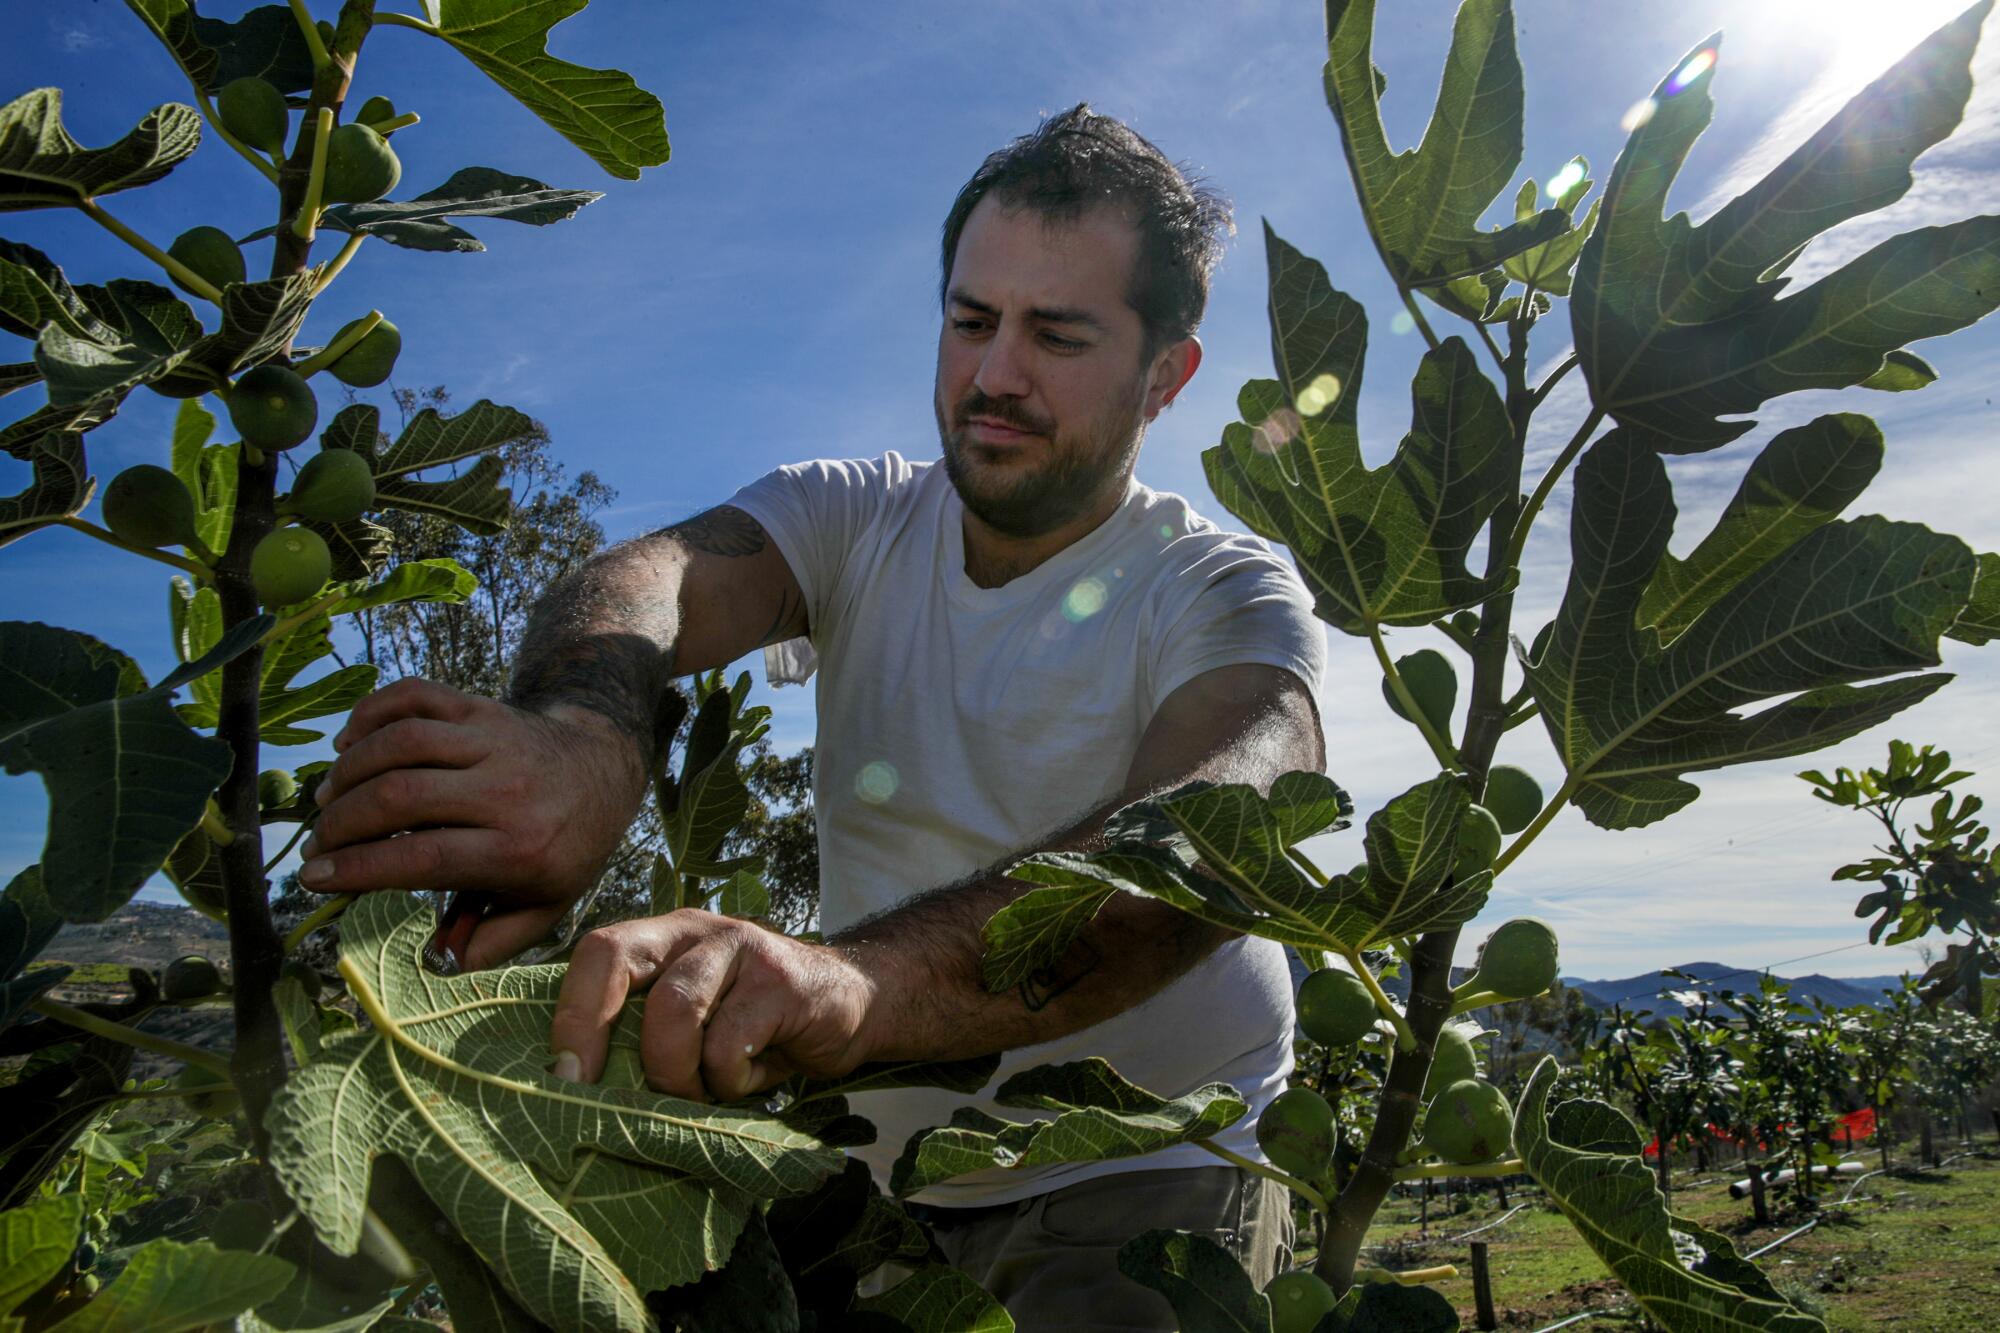 Balo Orozco, a founder of Sunset Cultures, among the fig leaves.